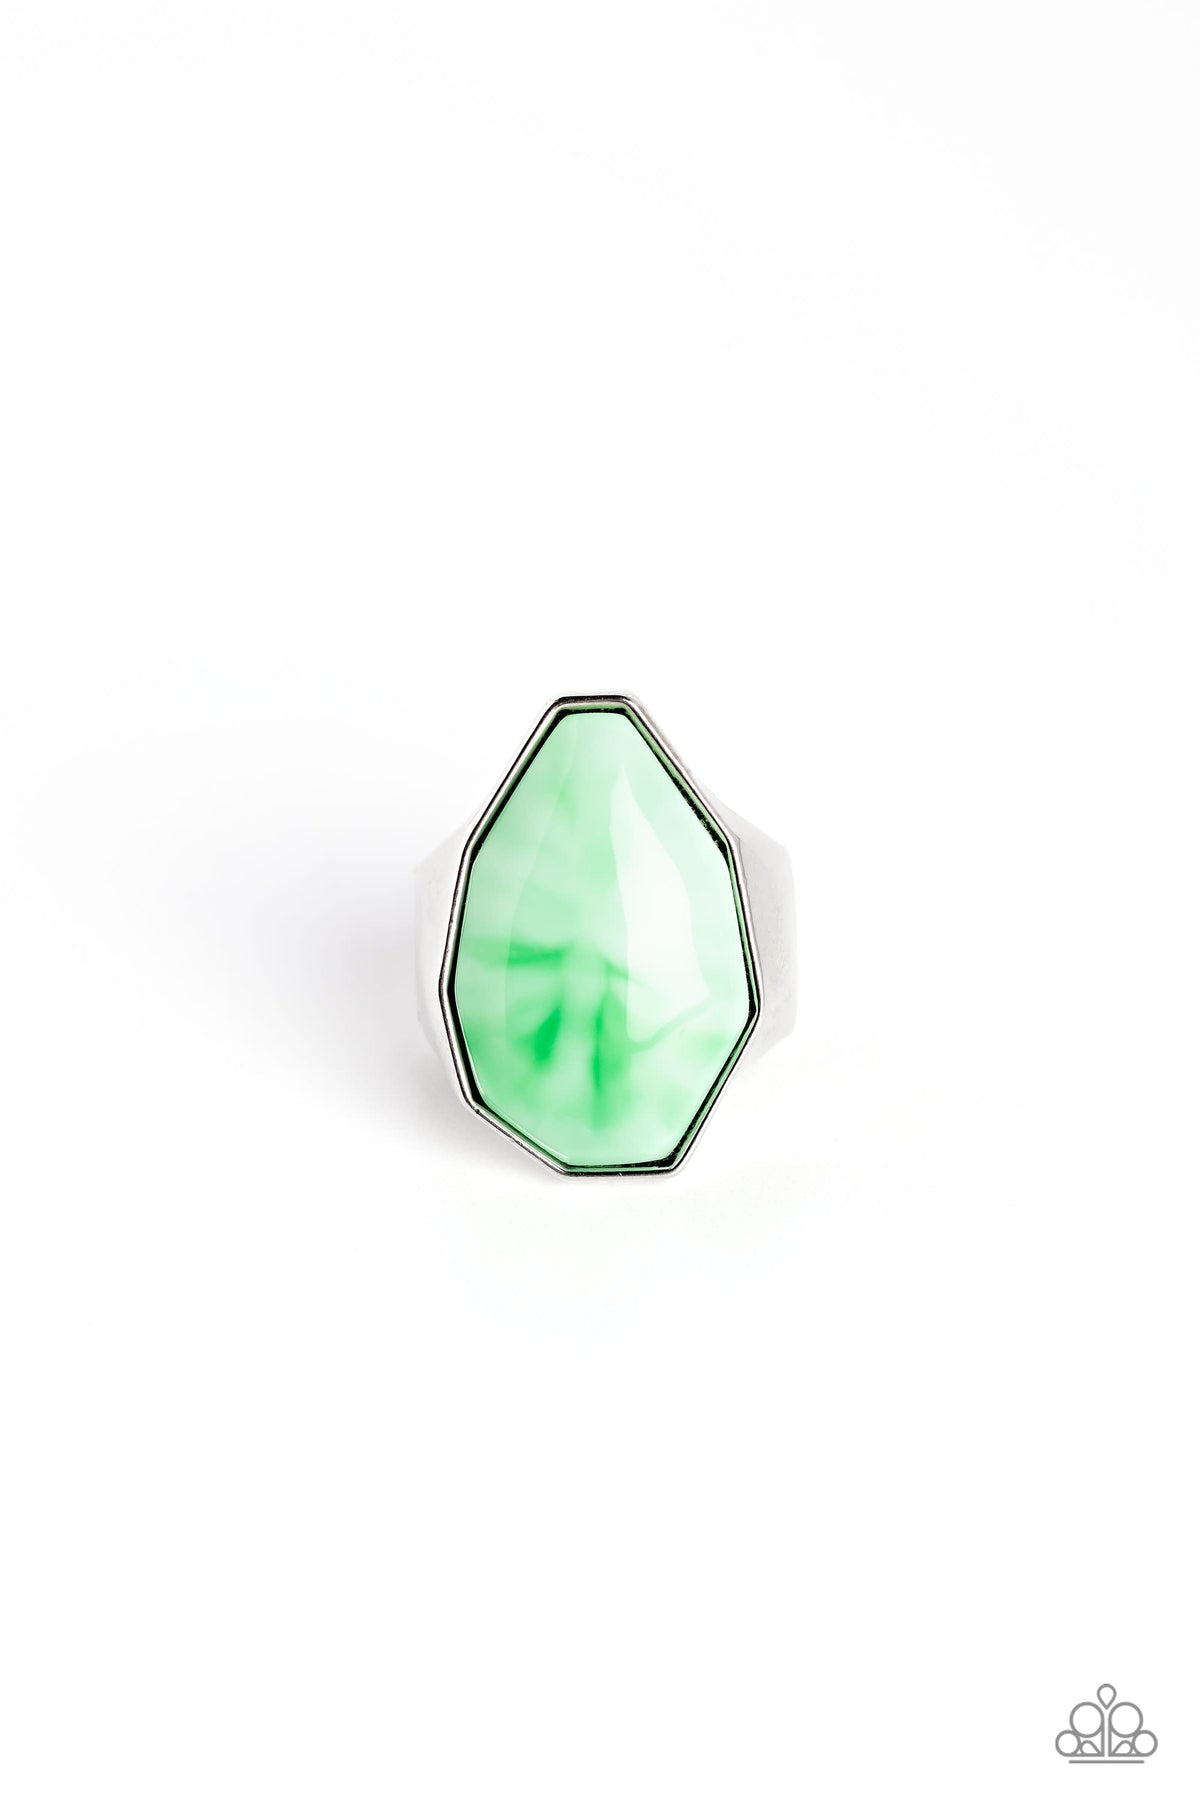 Never Say TIE DYE Green Ring - Paparazzi Accessories- lightbox - CarasShop.com - $5 Jewelry by Cara Jewels